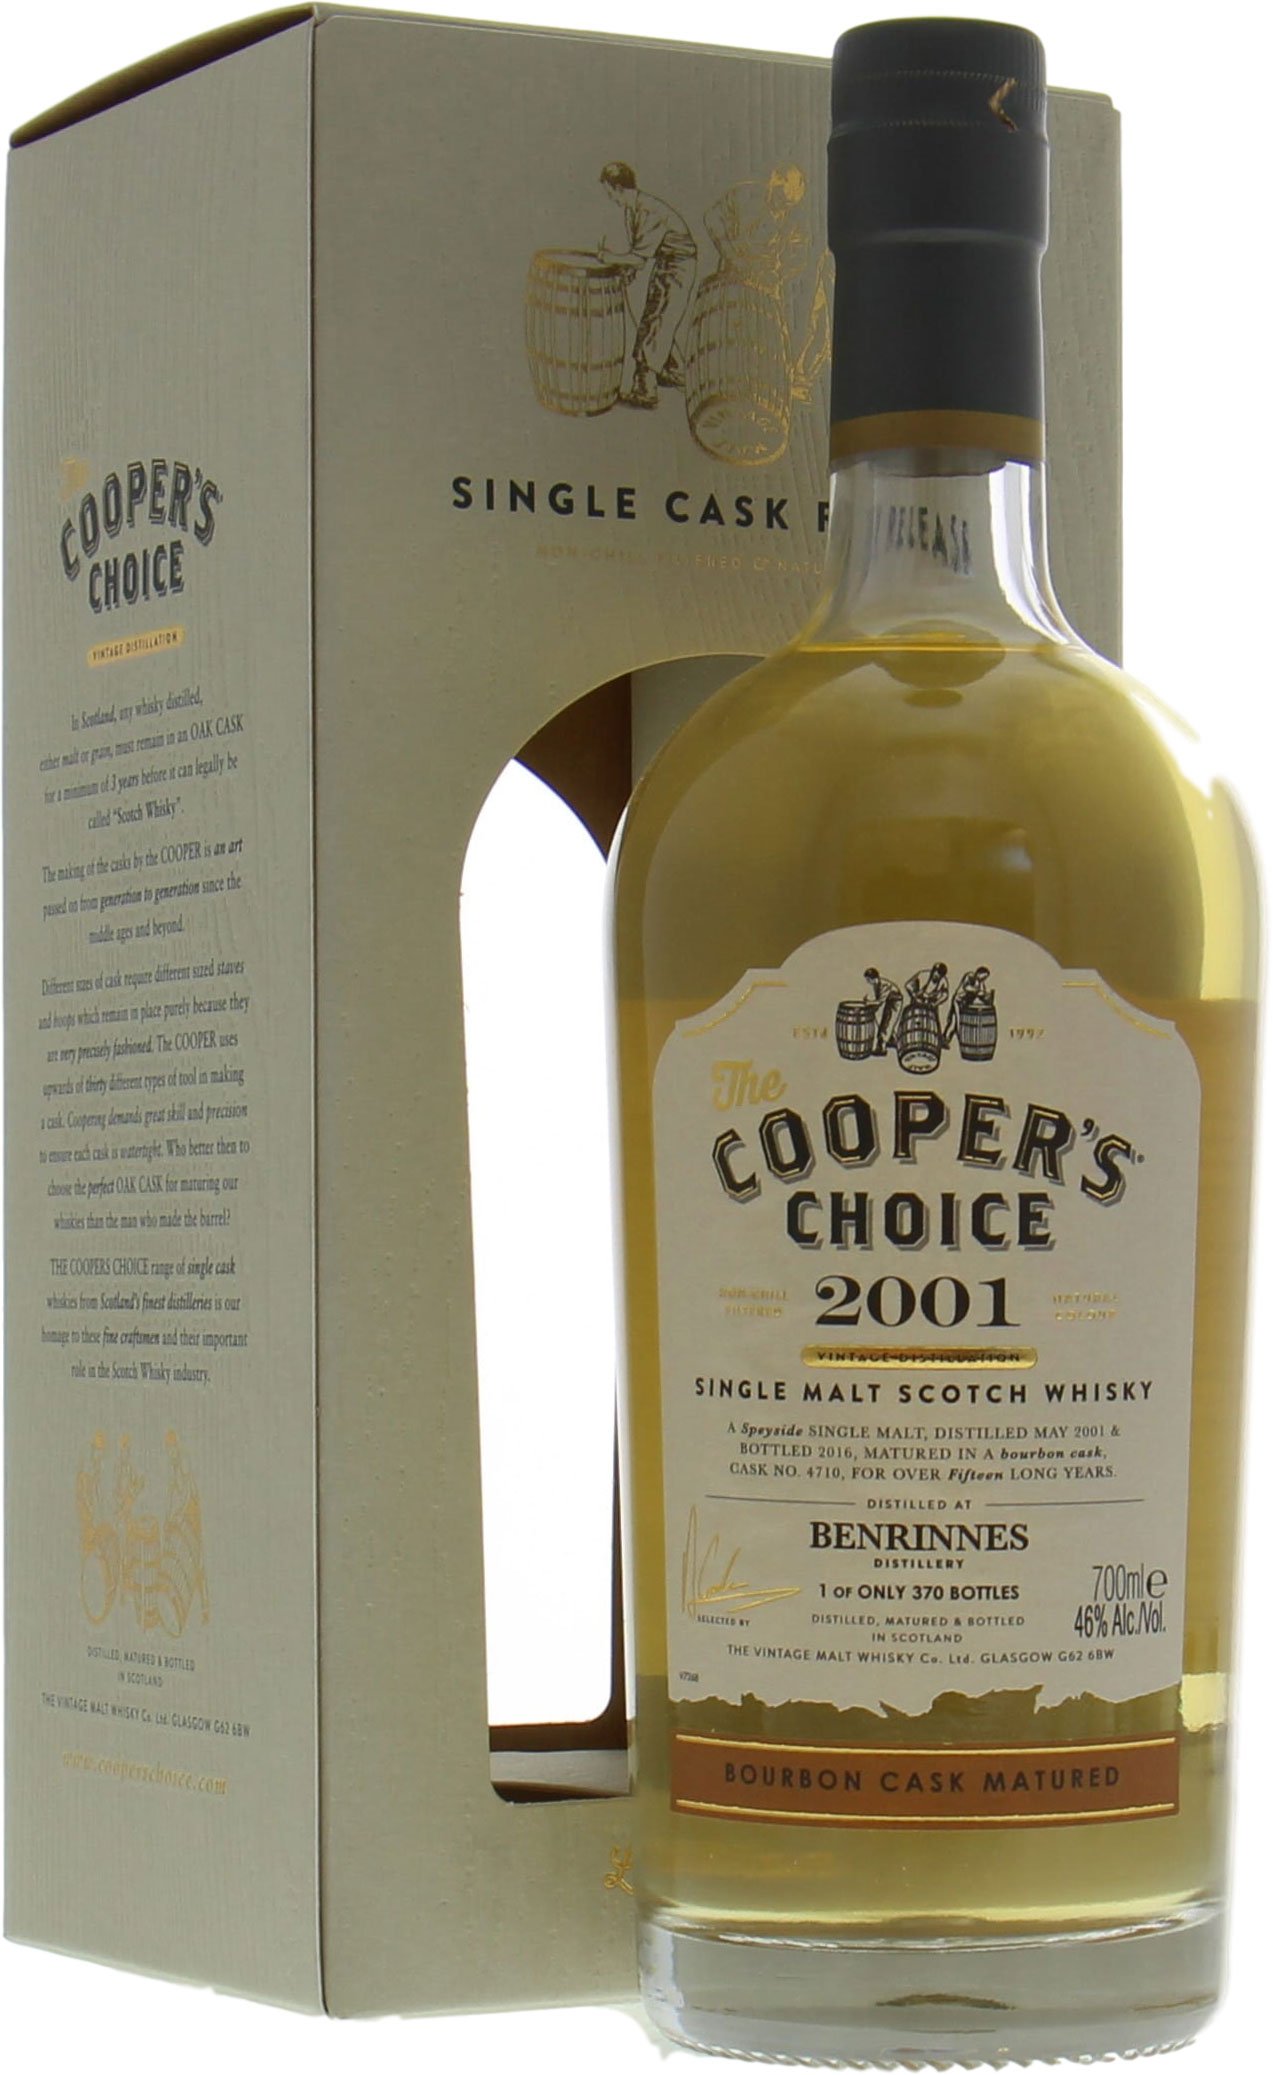 Benrinnes - 15 Years Old Cooper's Choice Cask:4710 46% 2001 In Original Container